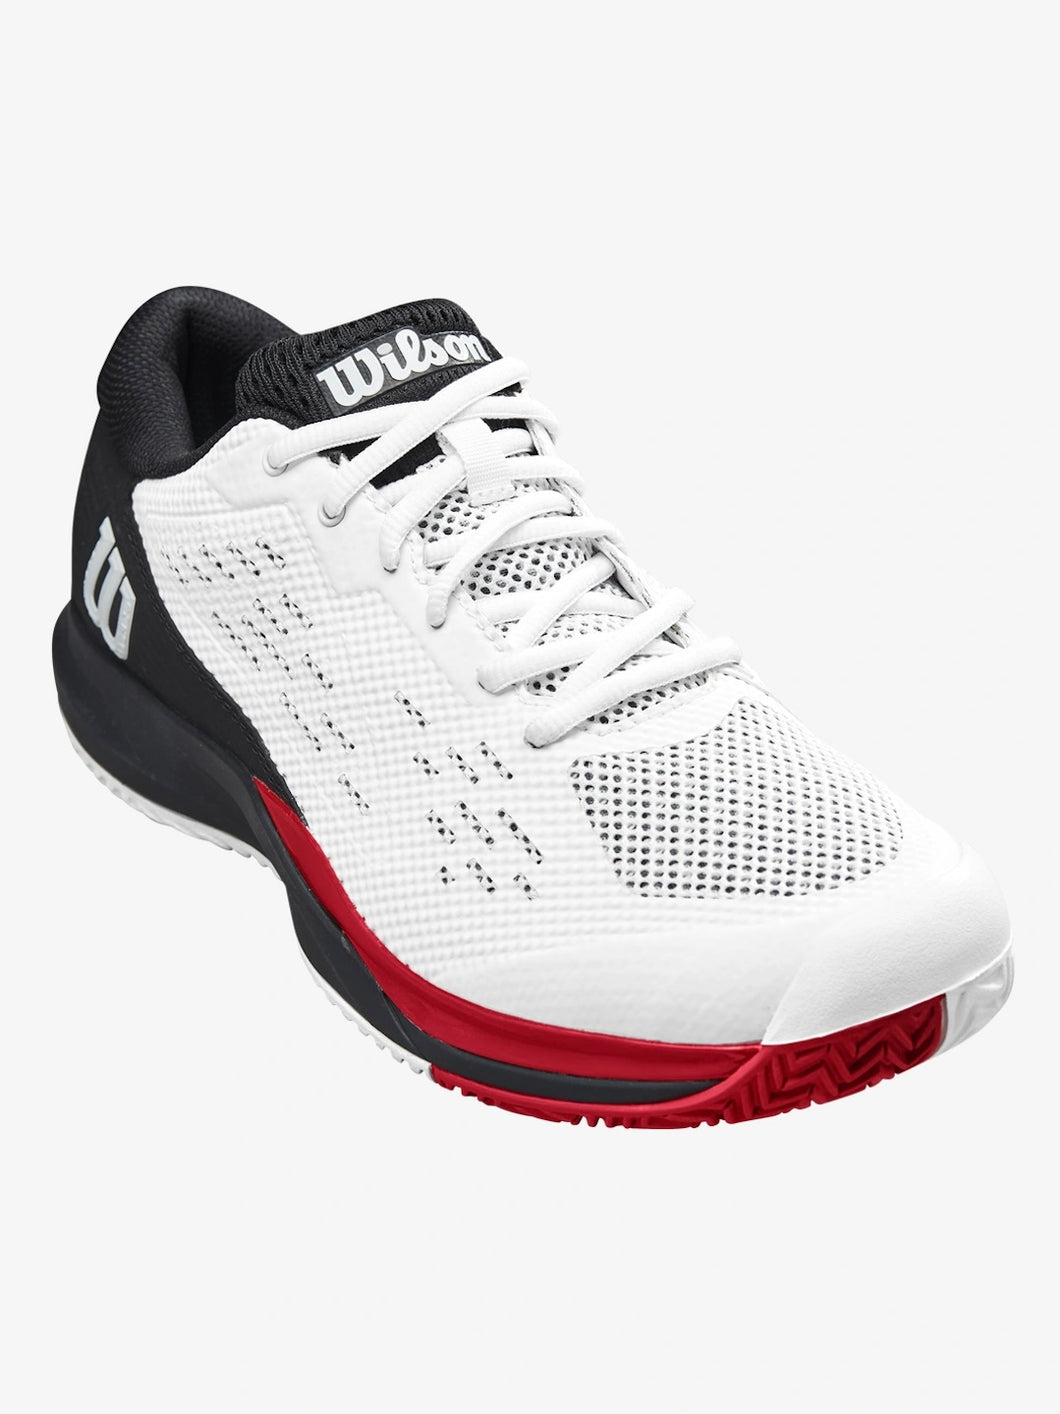 The most generous fit in the popular Rush Pro line, the Rush Pro Ace earns high grades for tennis players with a strong preference for comfort on the court.